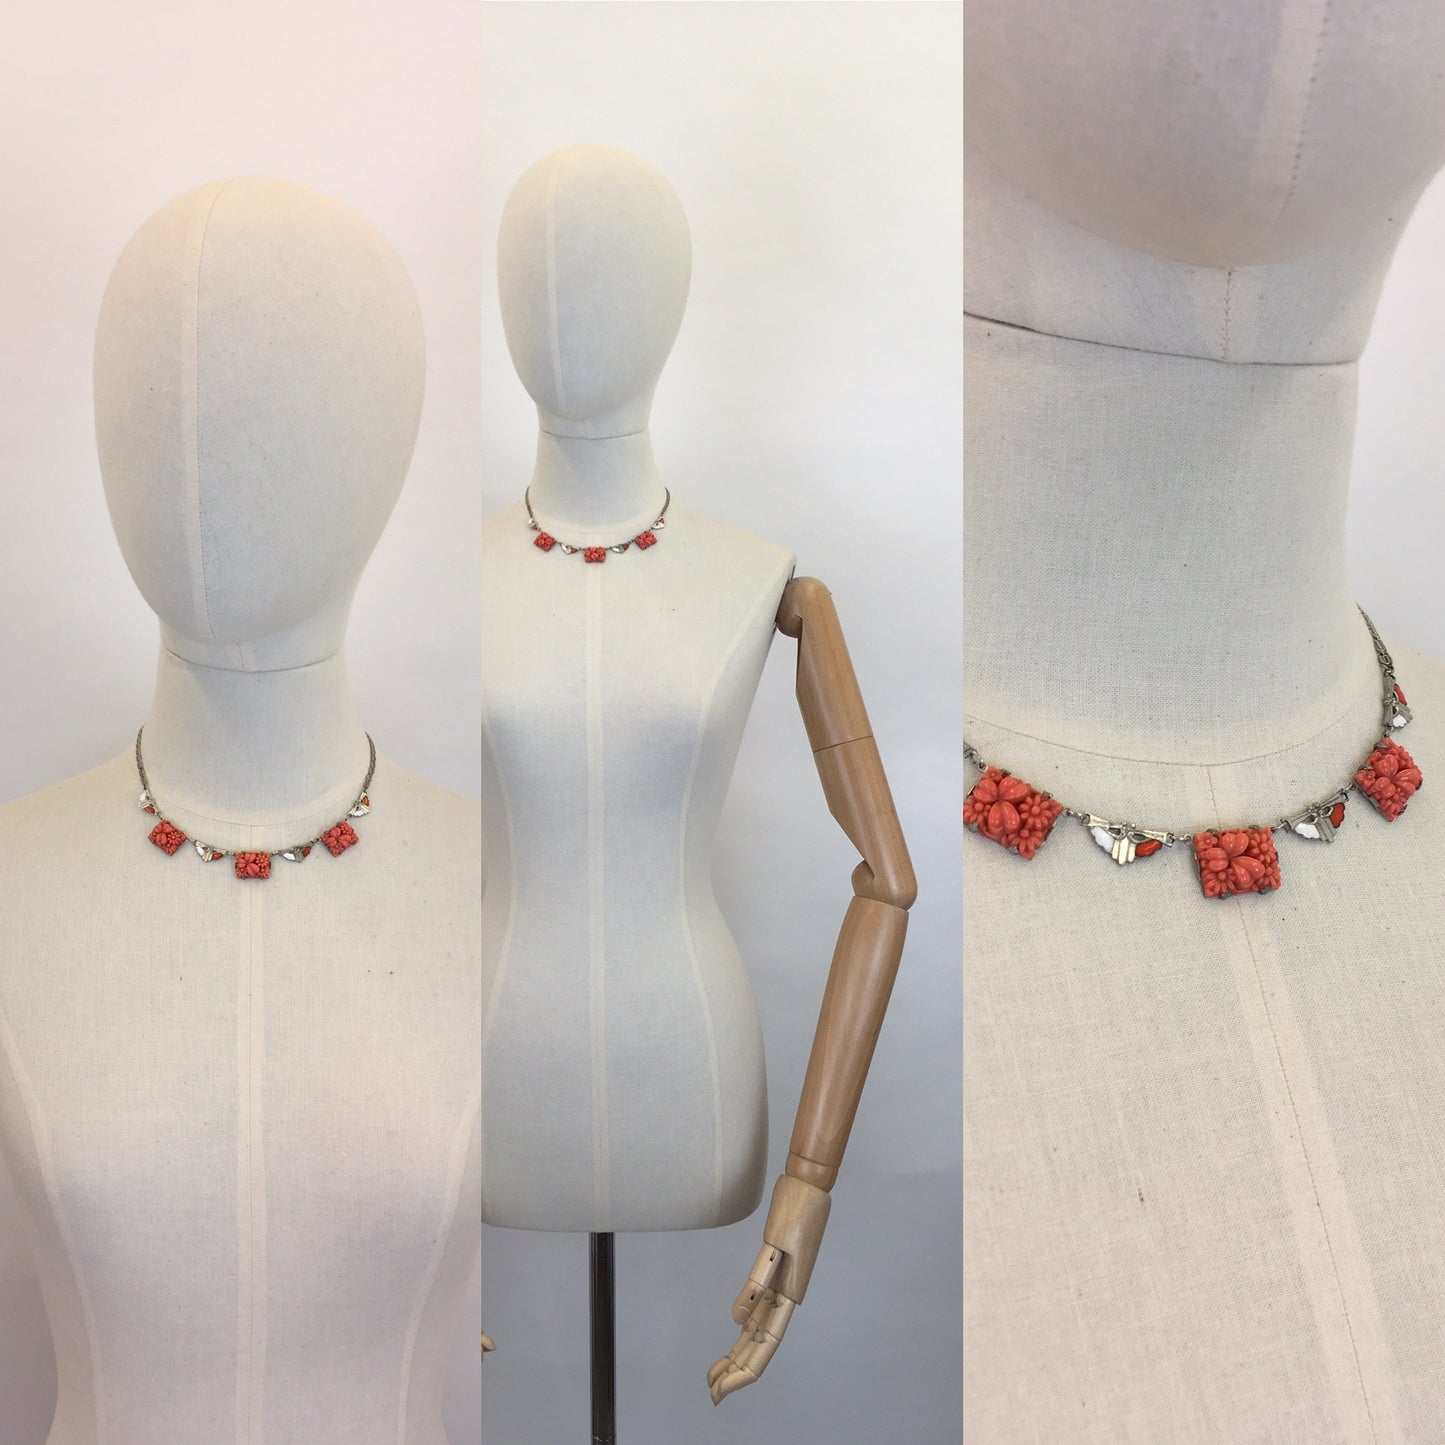 Original 1930s Coral Pressed Glass & Enamel Necklace - With Intricate Deco Detailing